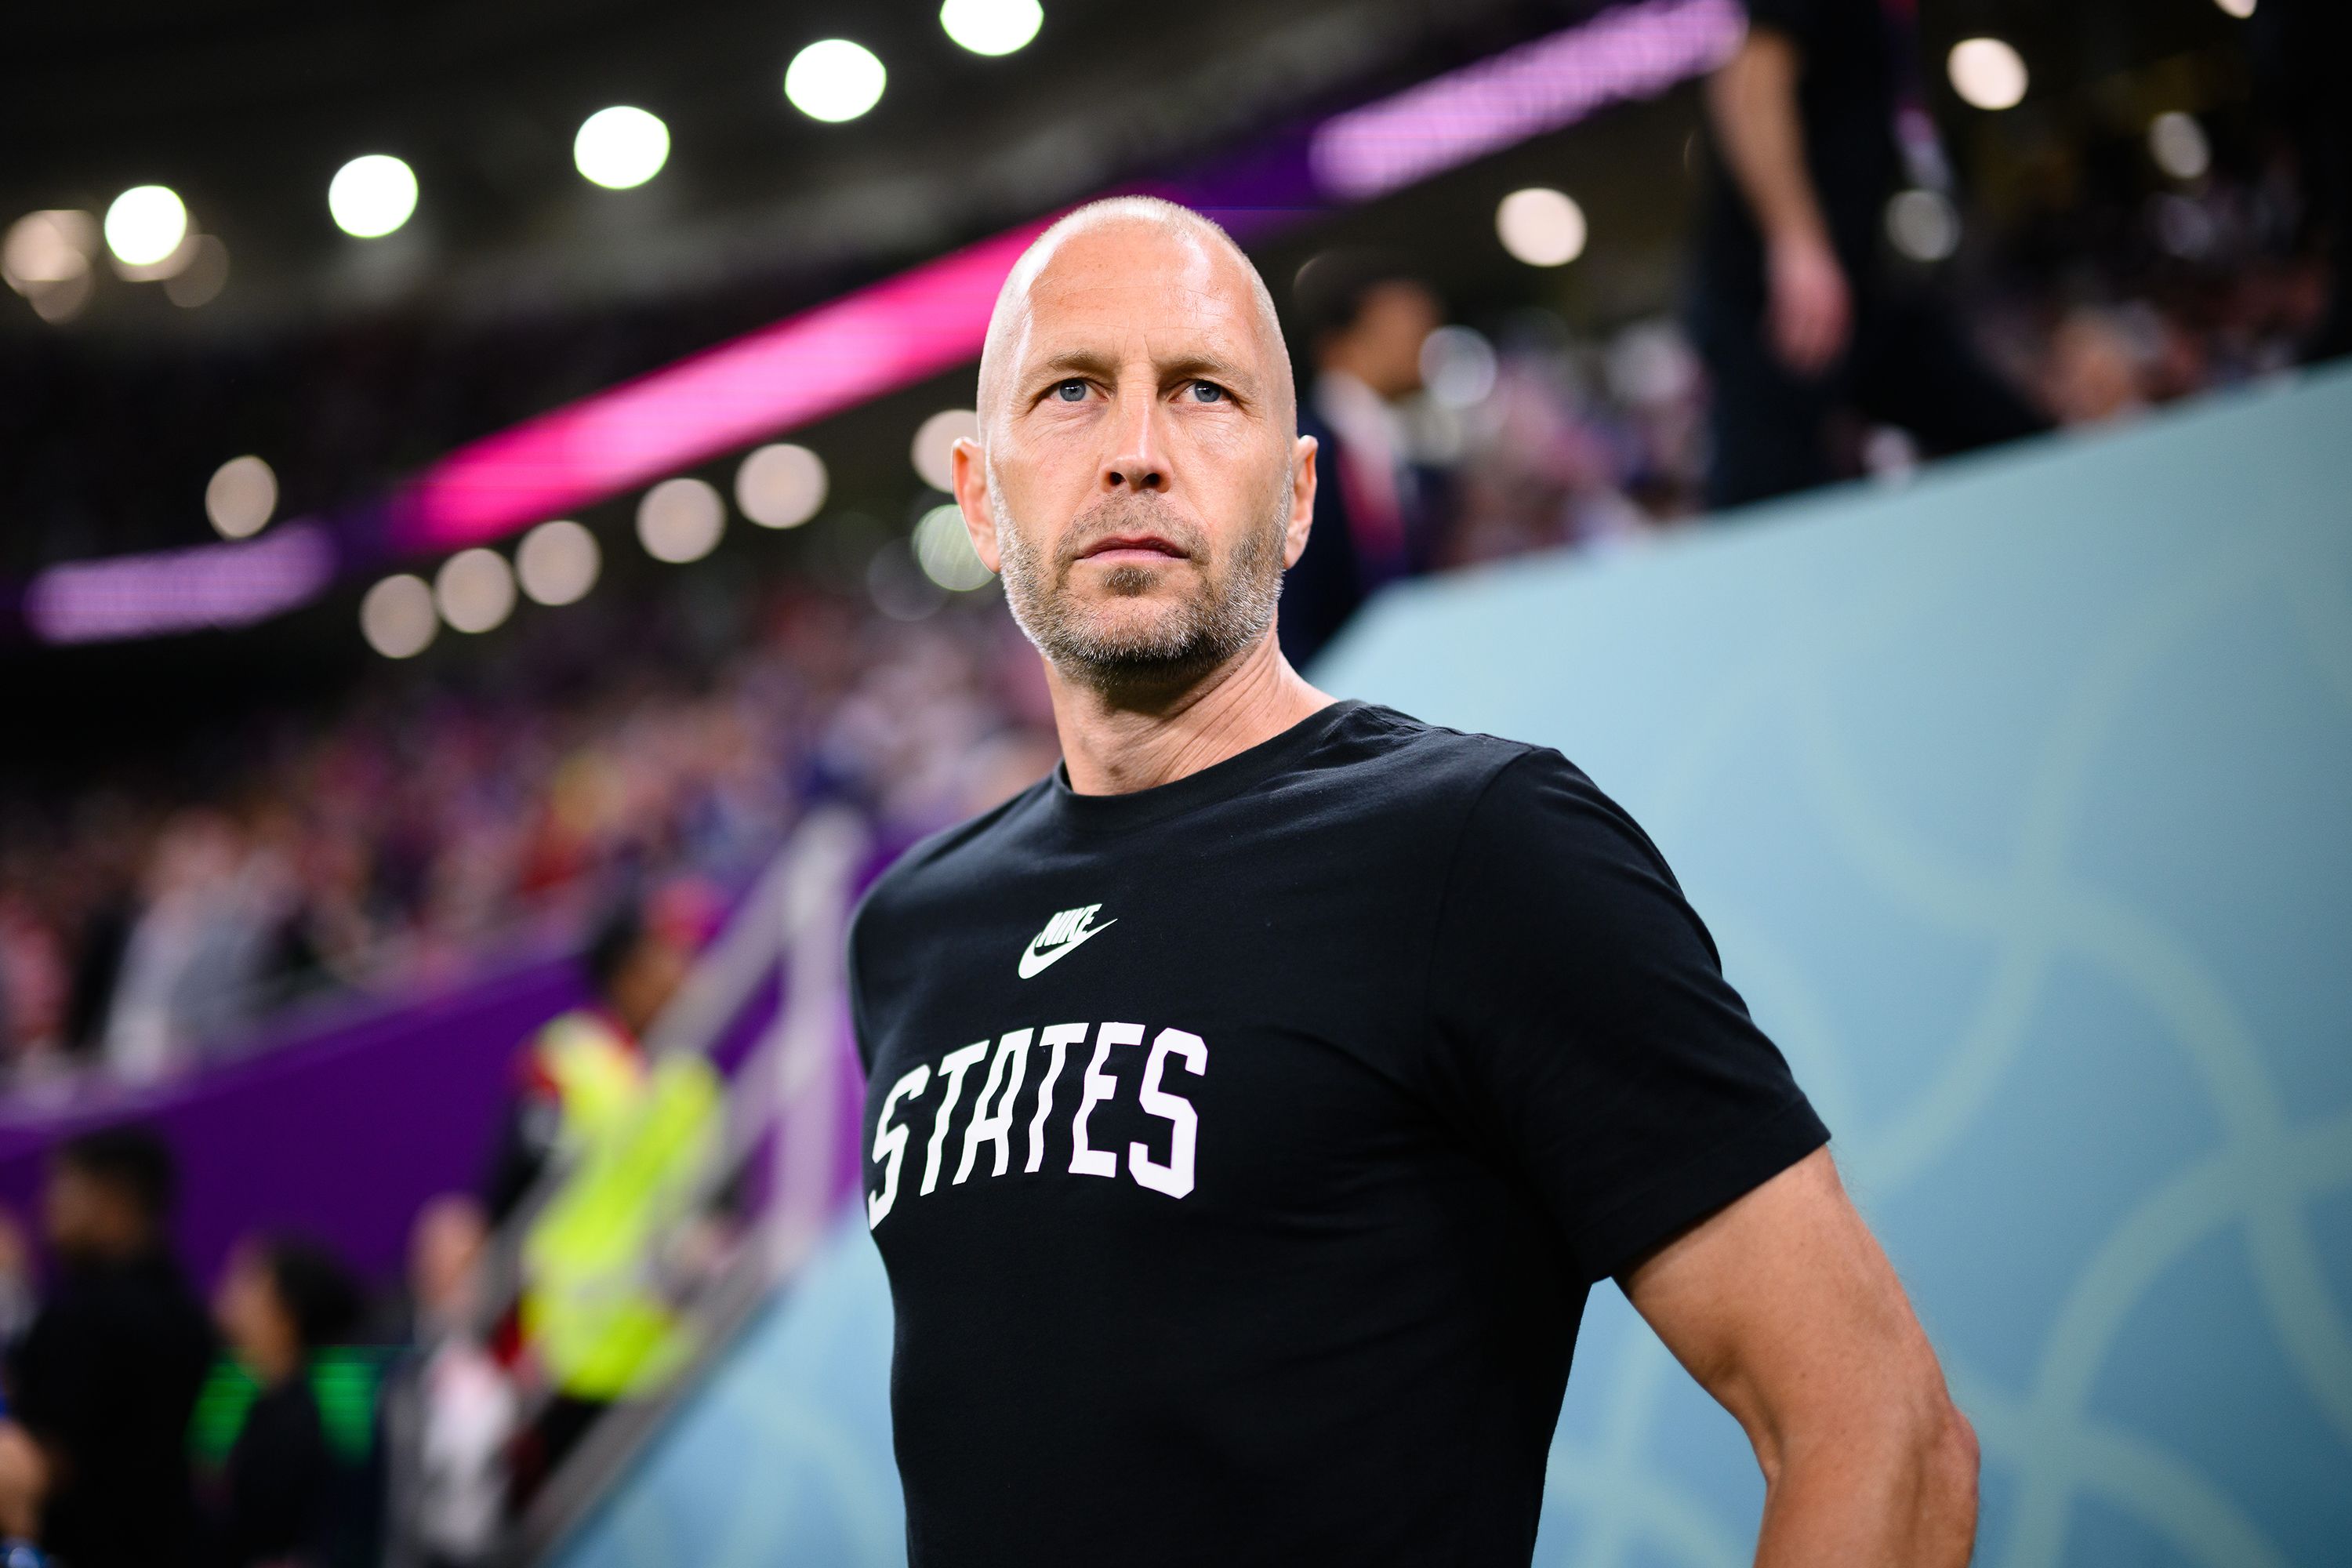 US Soccer's new sporting director tells CNN Gregg Berhalter is a candidate  for the USMNT opening